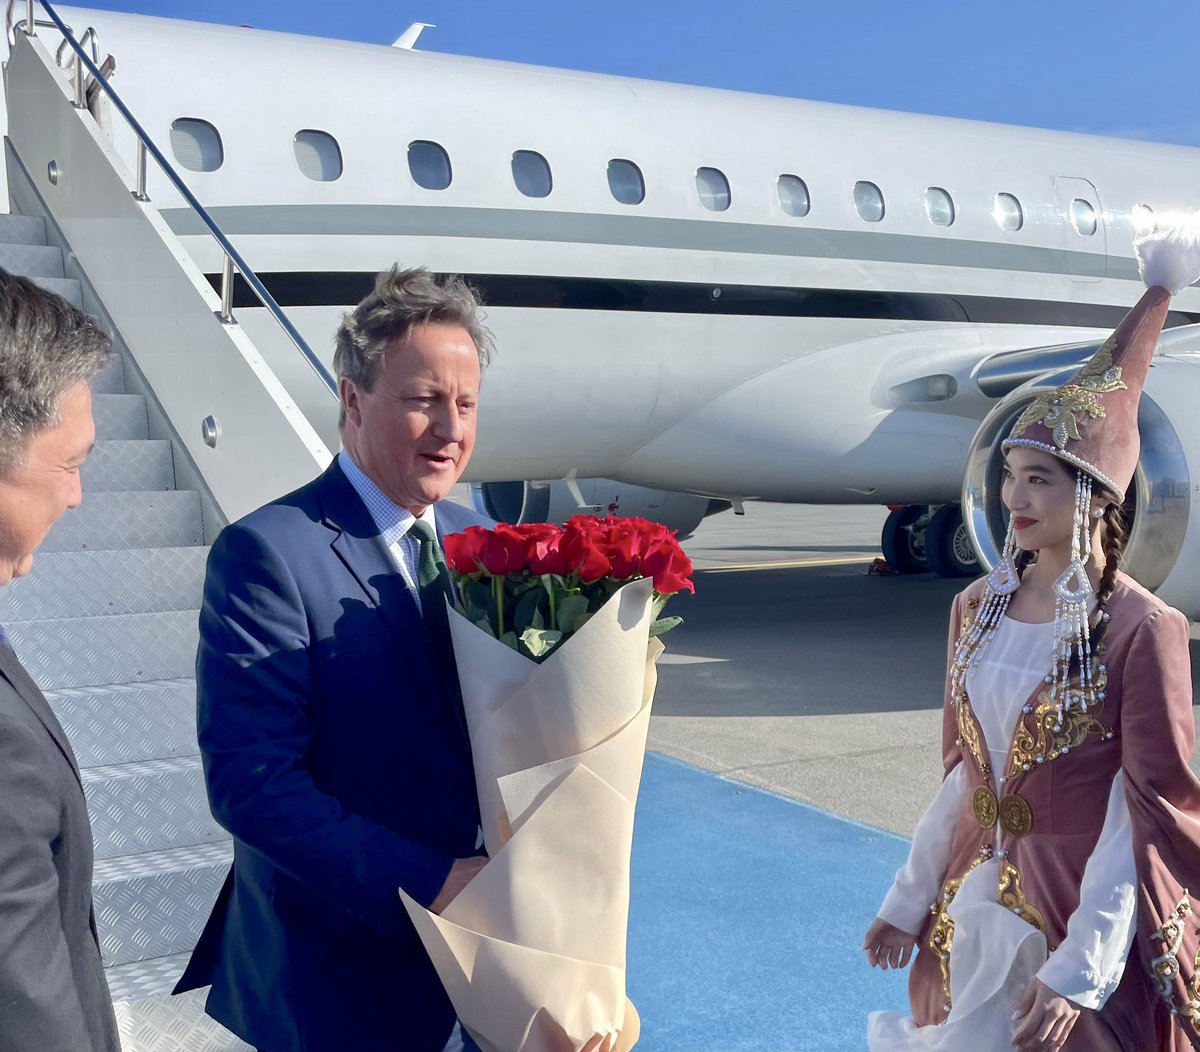 Welcoming back to Kazakhstan 🇰🇿 Lord @David_Cameron. FS sets off for a productive visit filled with high level meetings and signing of key bilateral documents to take our strategic partnership to the next level 🇰🇿 🤝🏻 🇬🇧